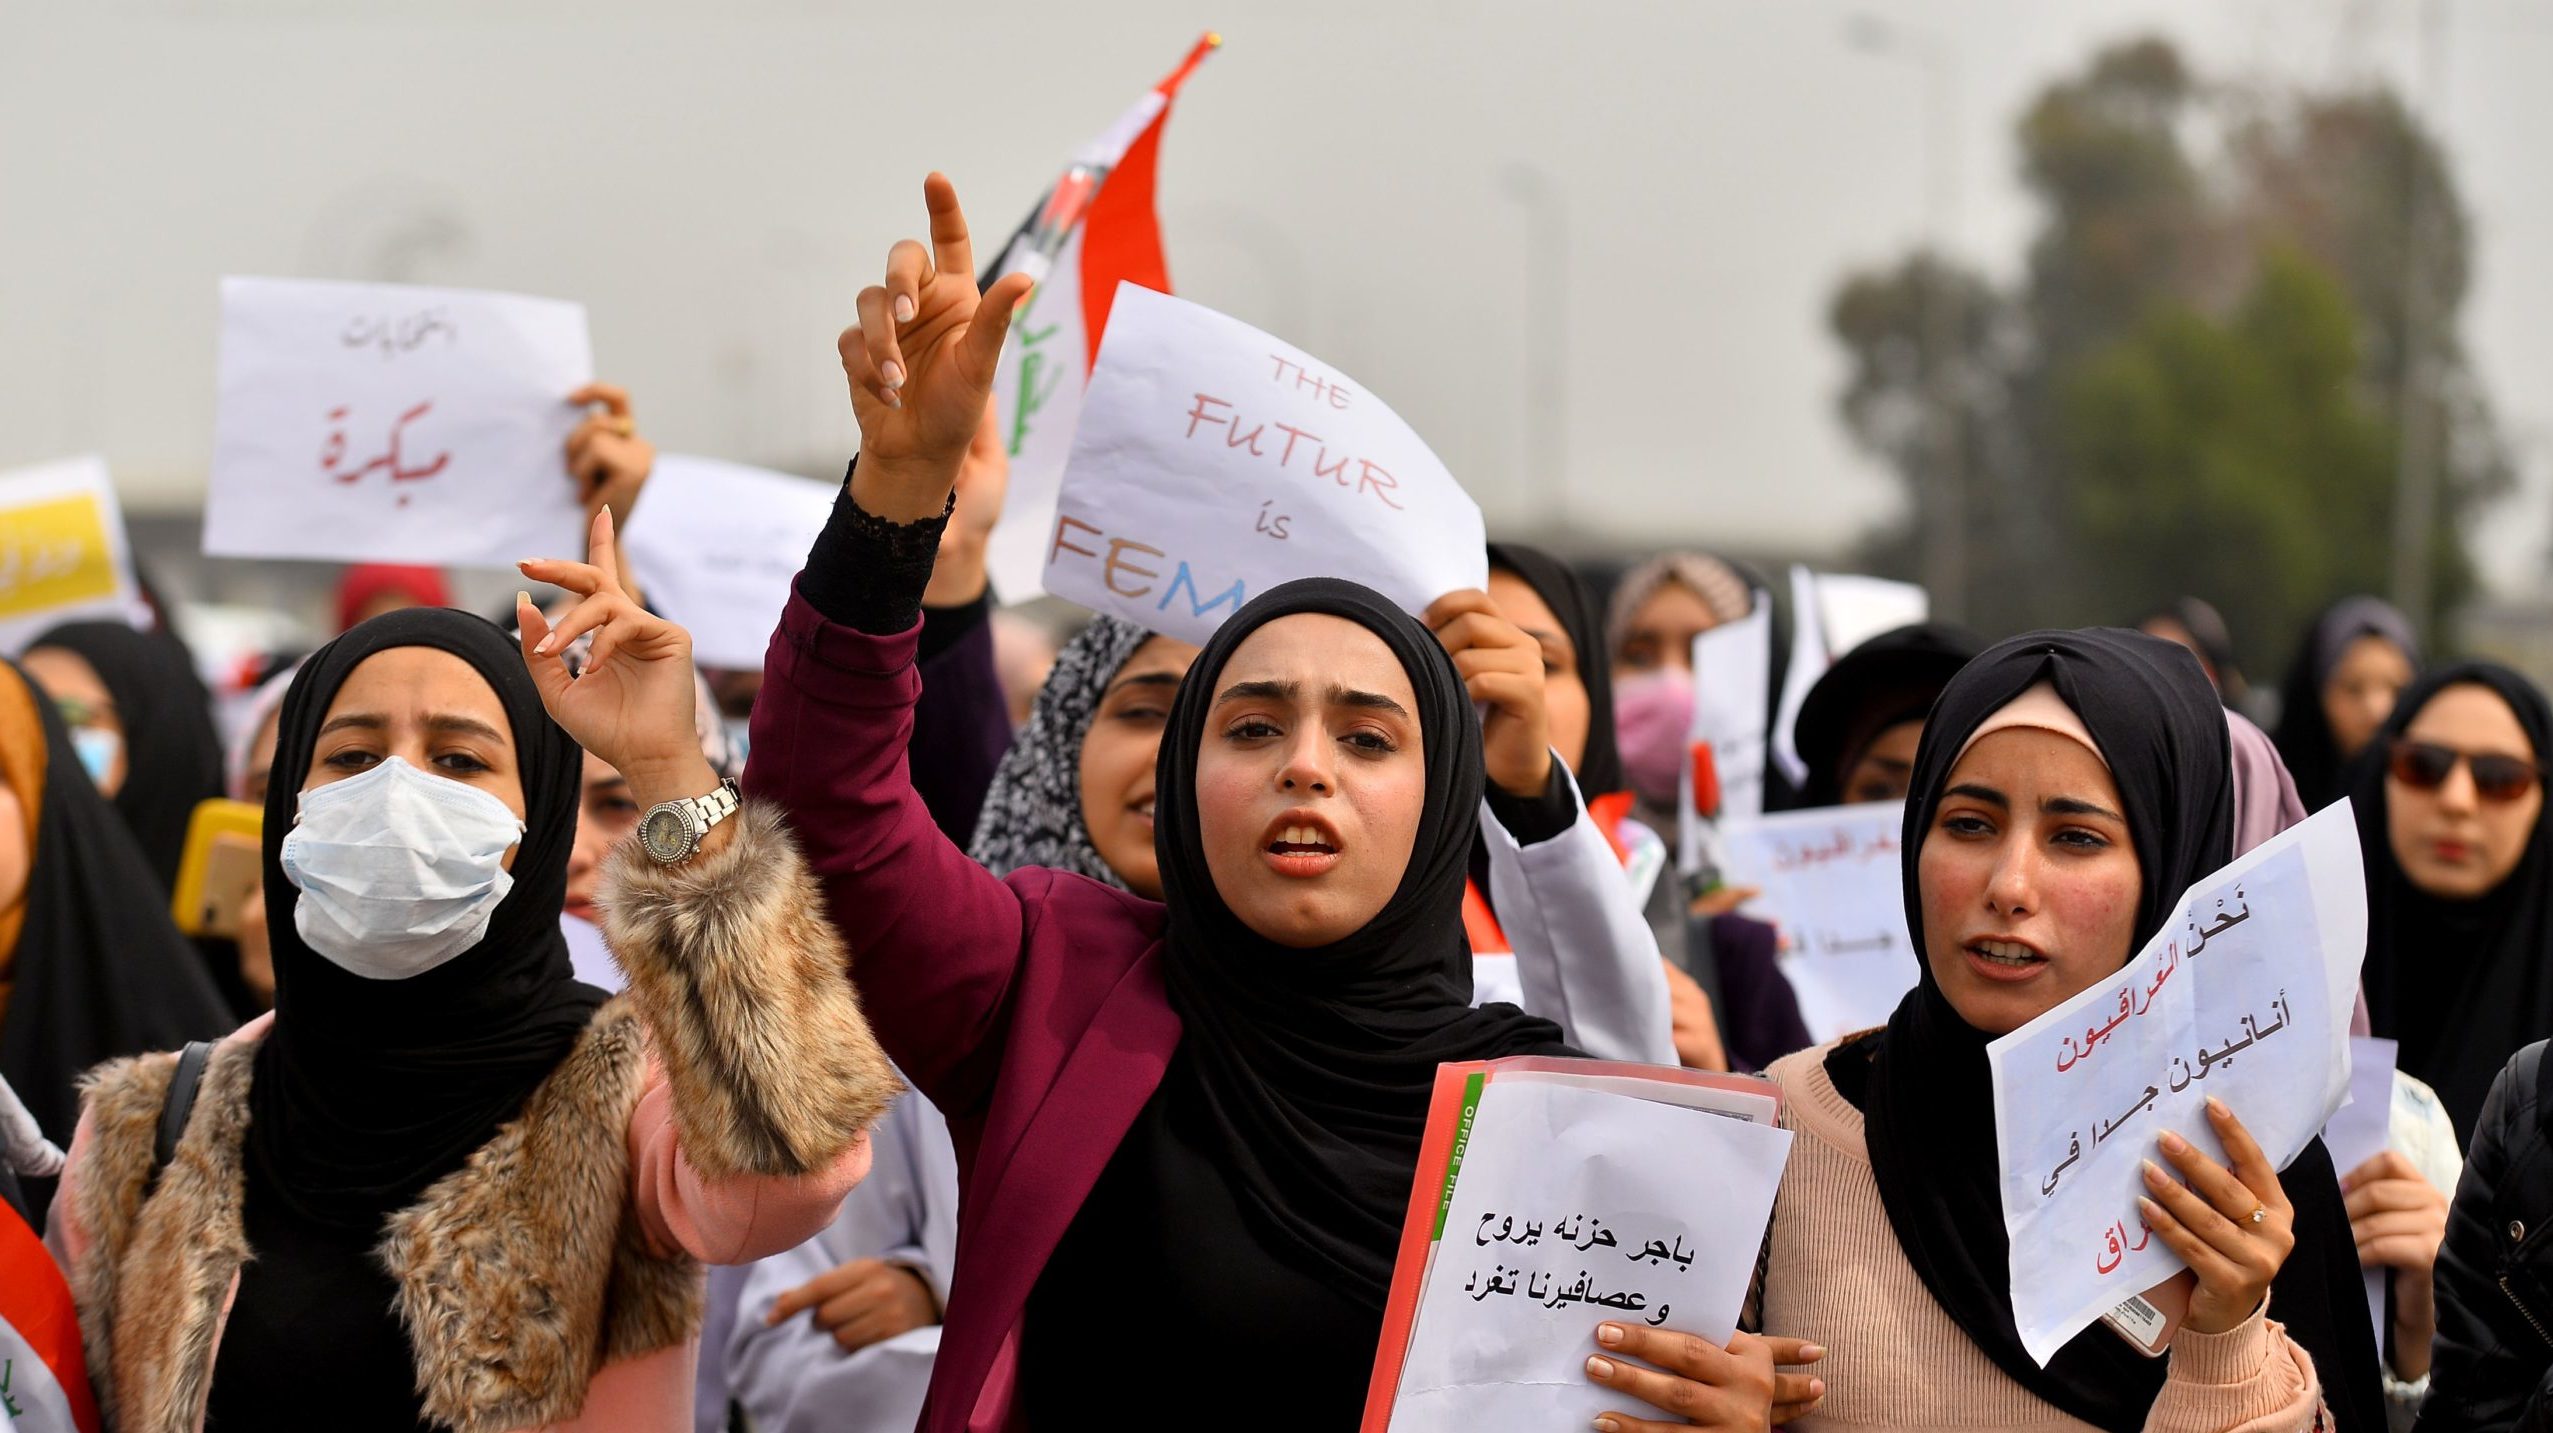 Iraqi Women Seek Rights – and to be Part of a Change - The Media Line